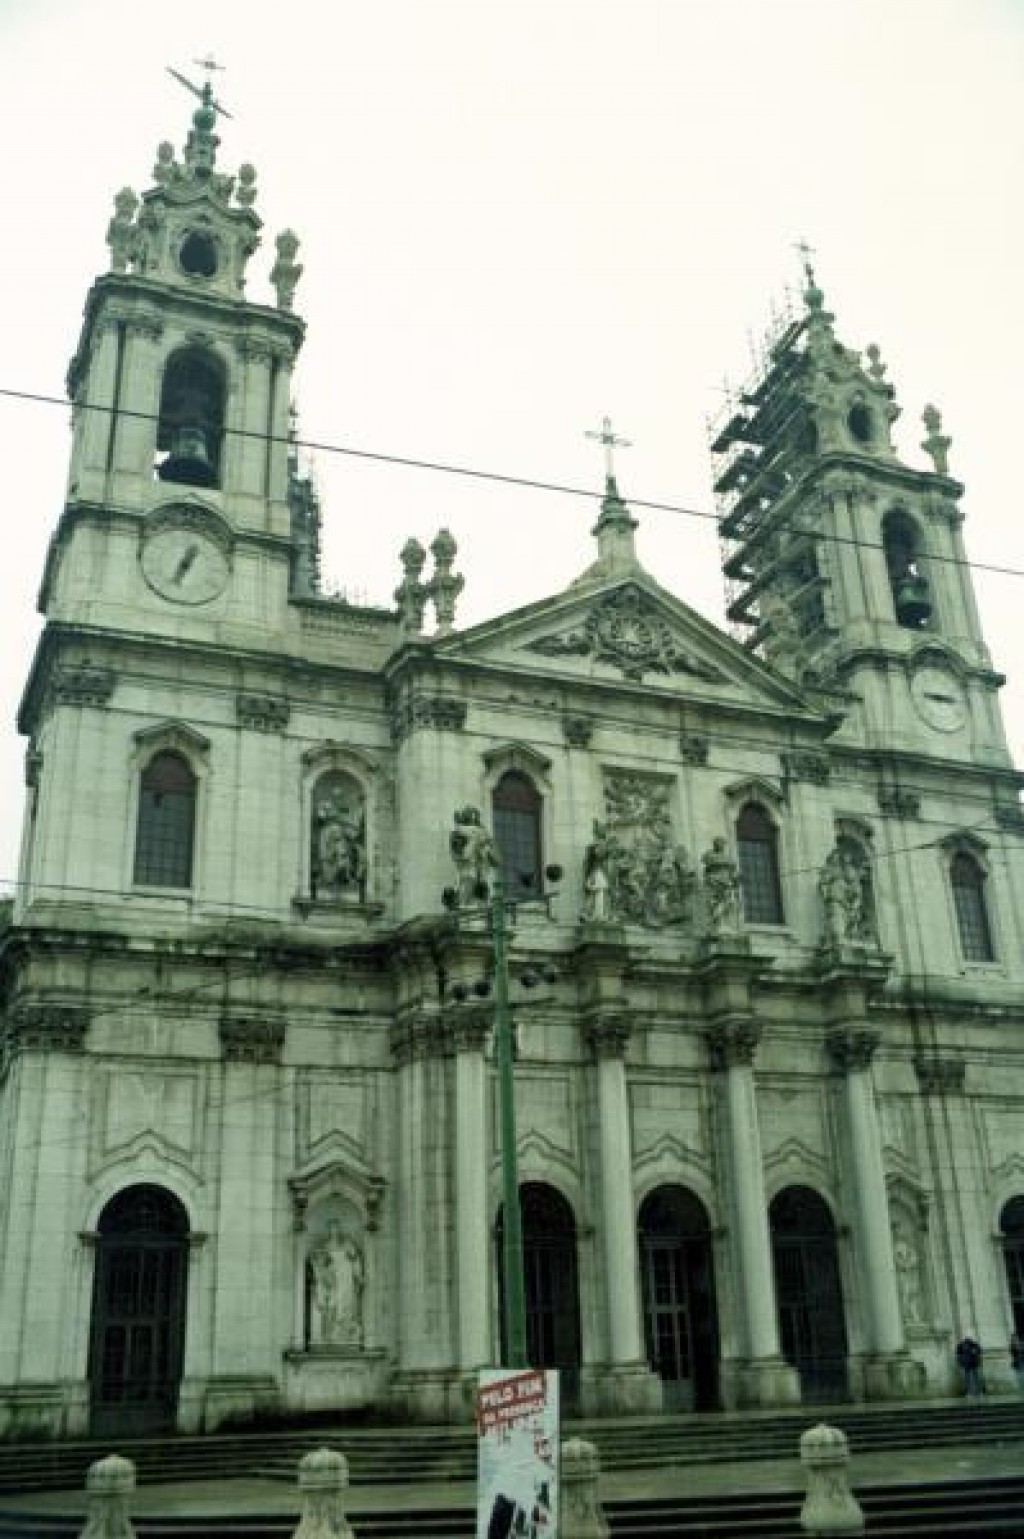 This is the Basilica Estrela, built in 1796 by Maria I who promised God she would build it she were given a son.